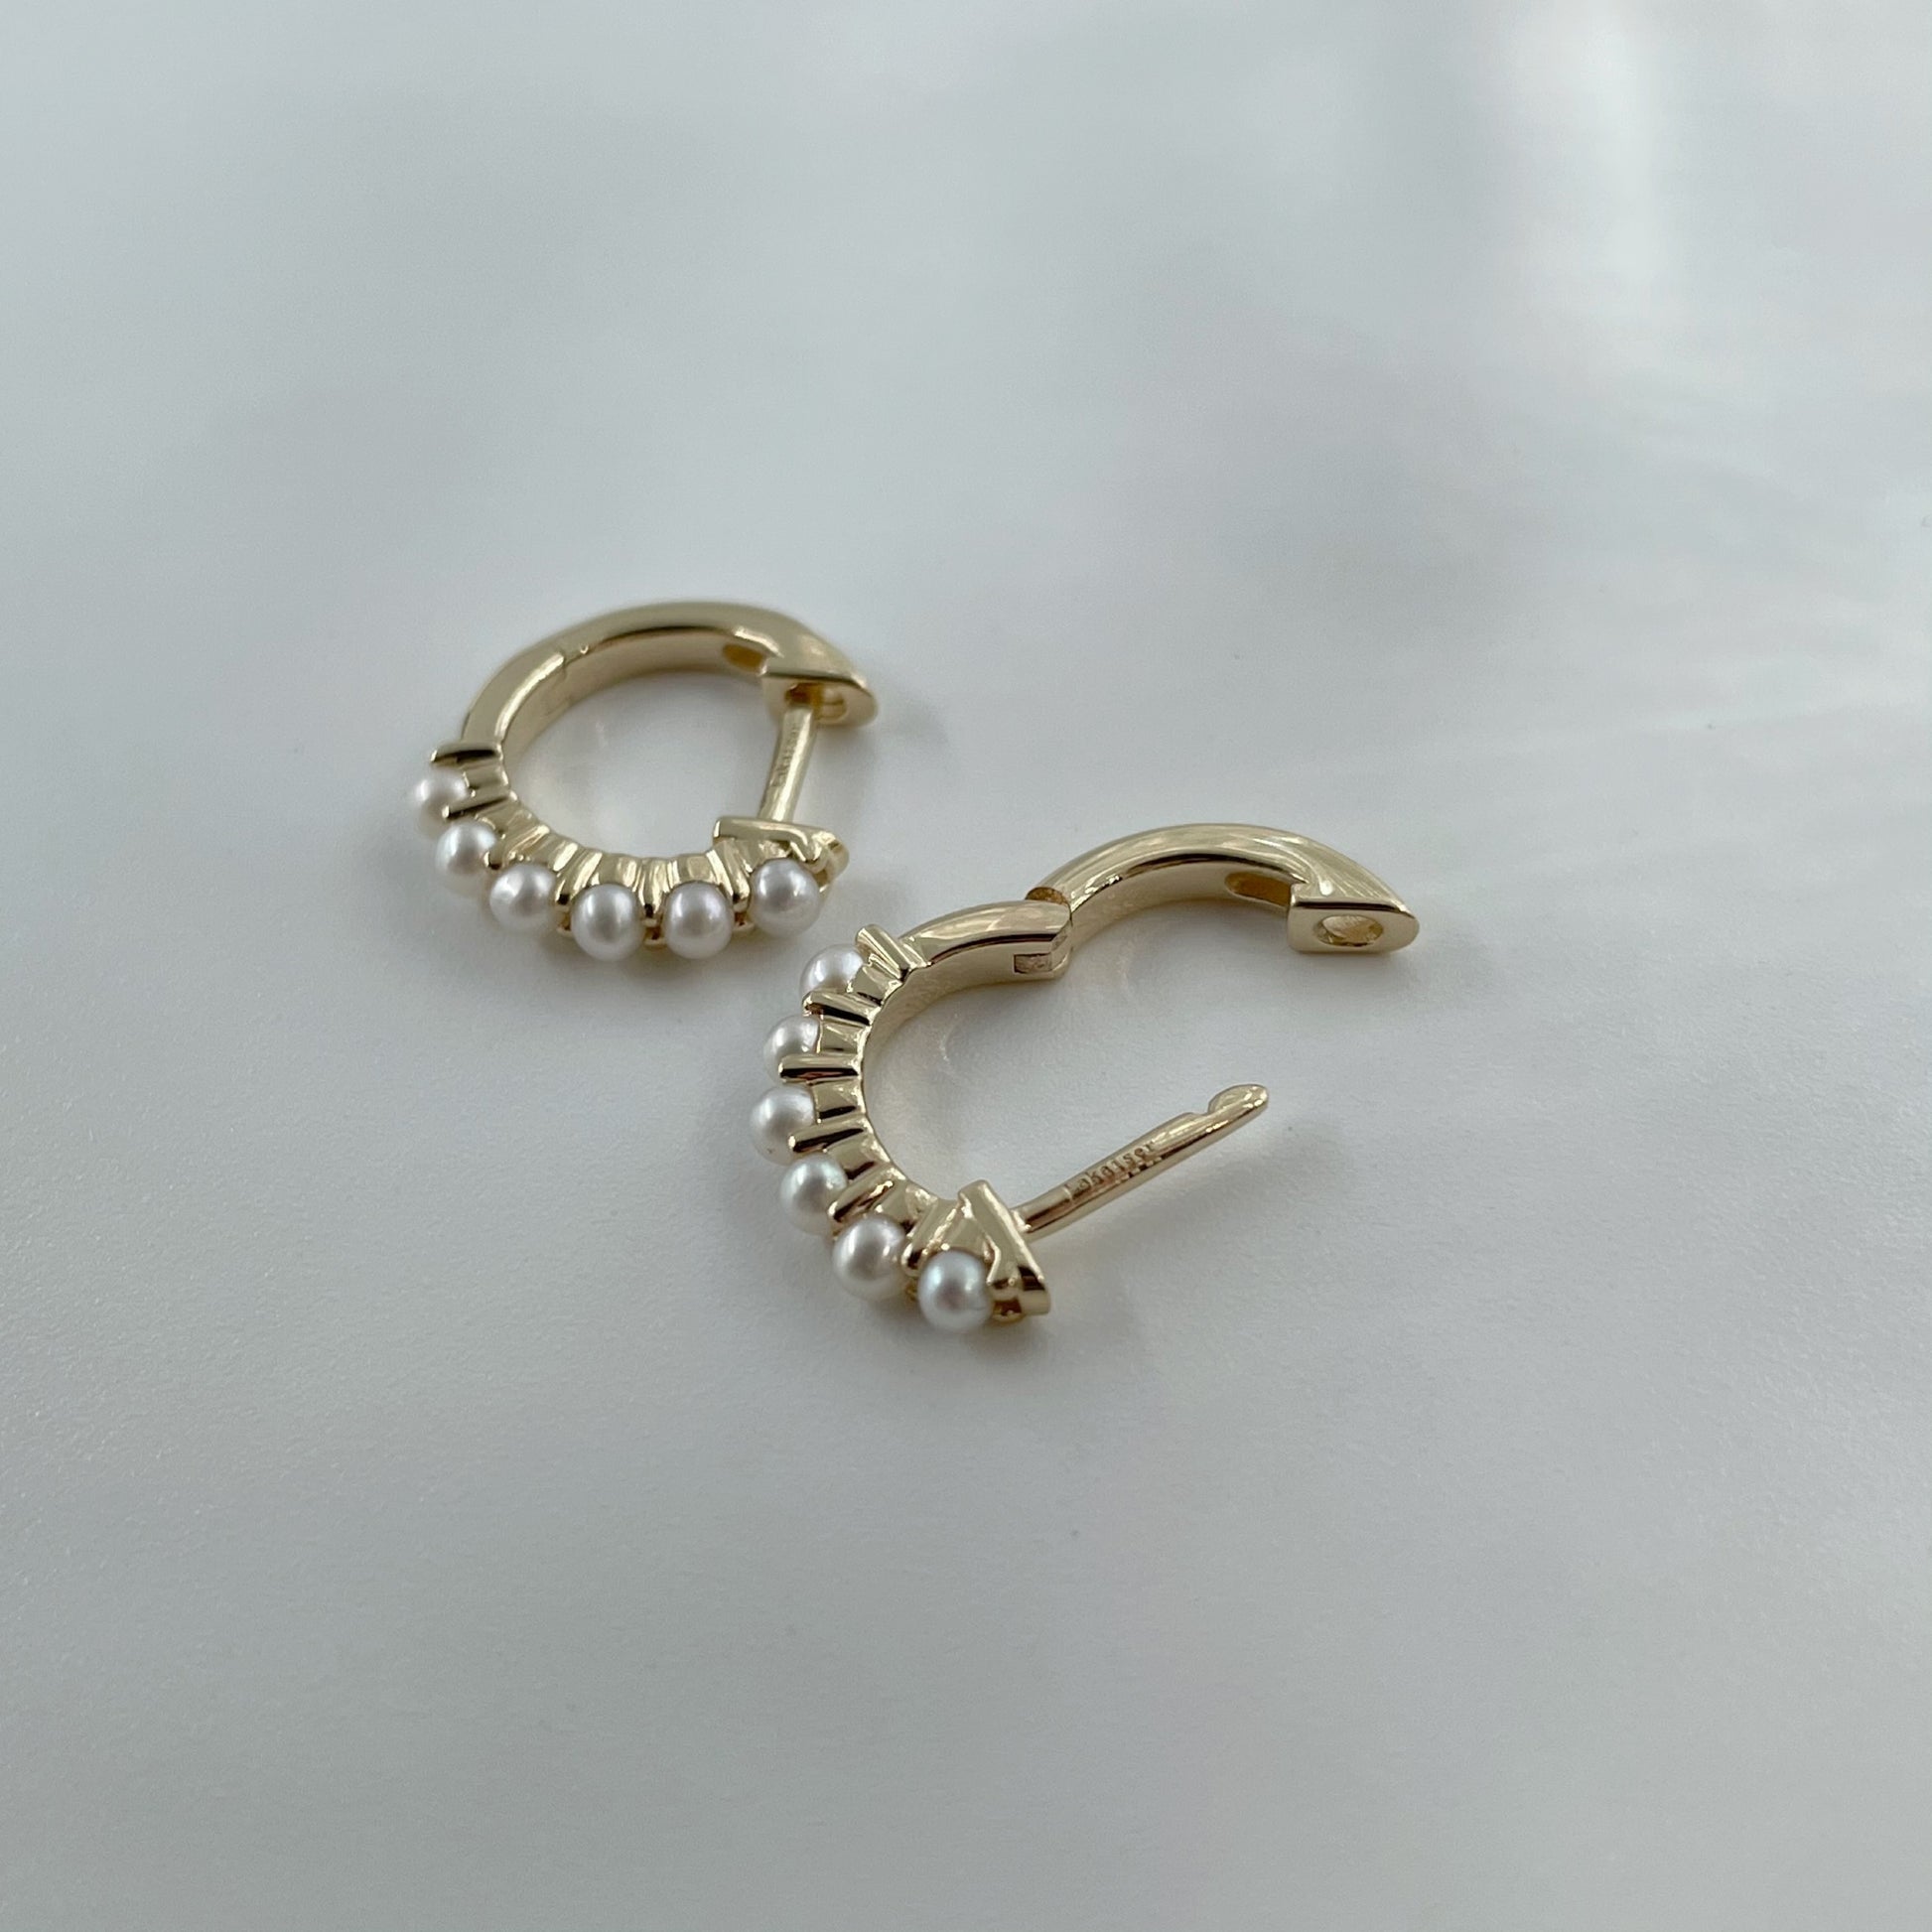 10kt Mini Pear hoops by La Kaiser. Sold exclusively in South Africa by Collective & Co. online jewellery store